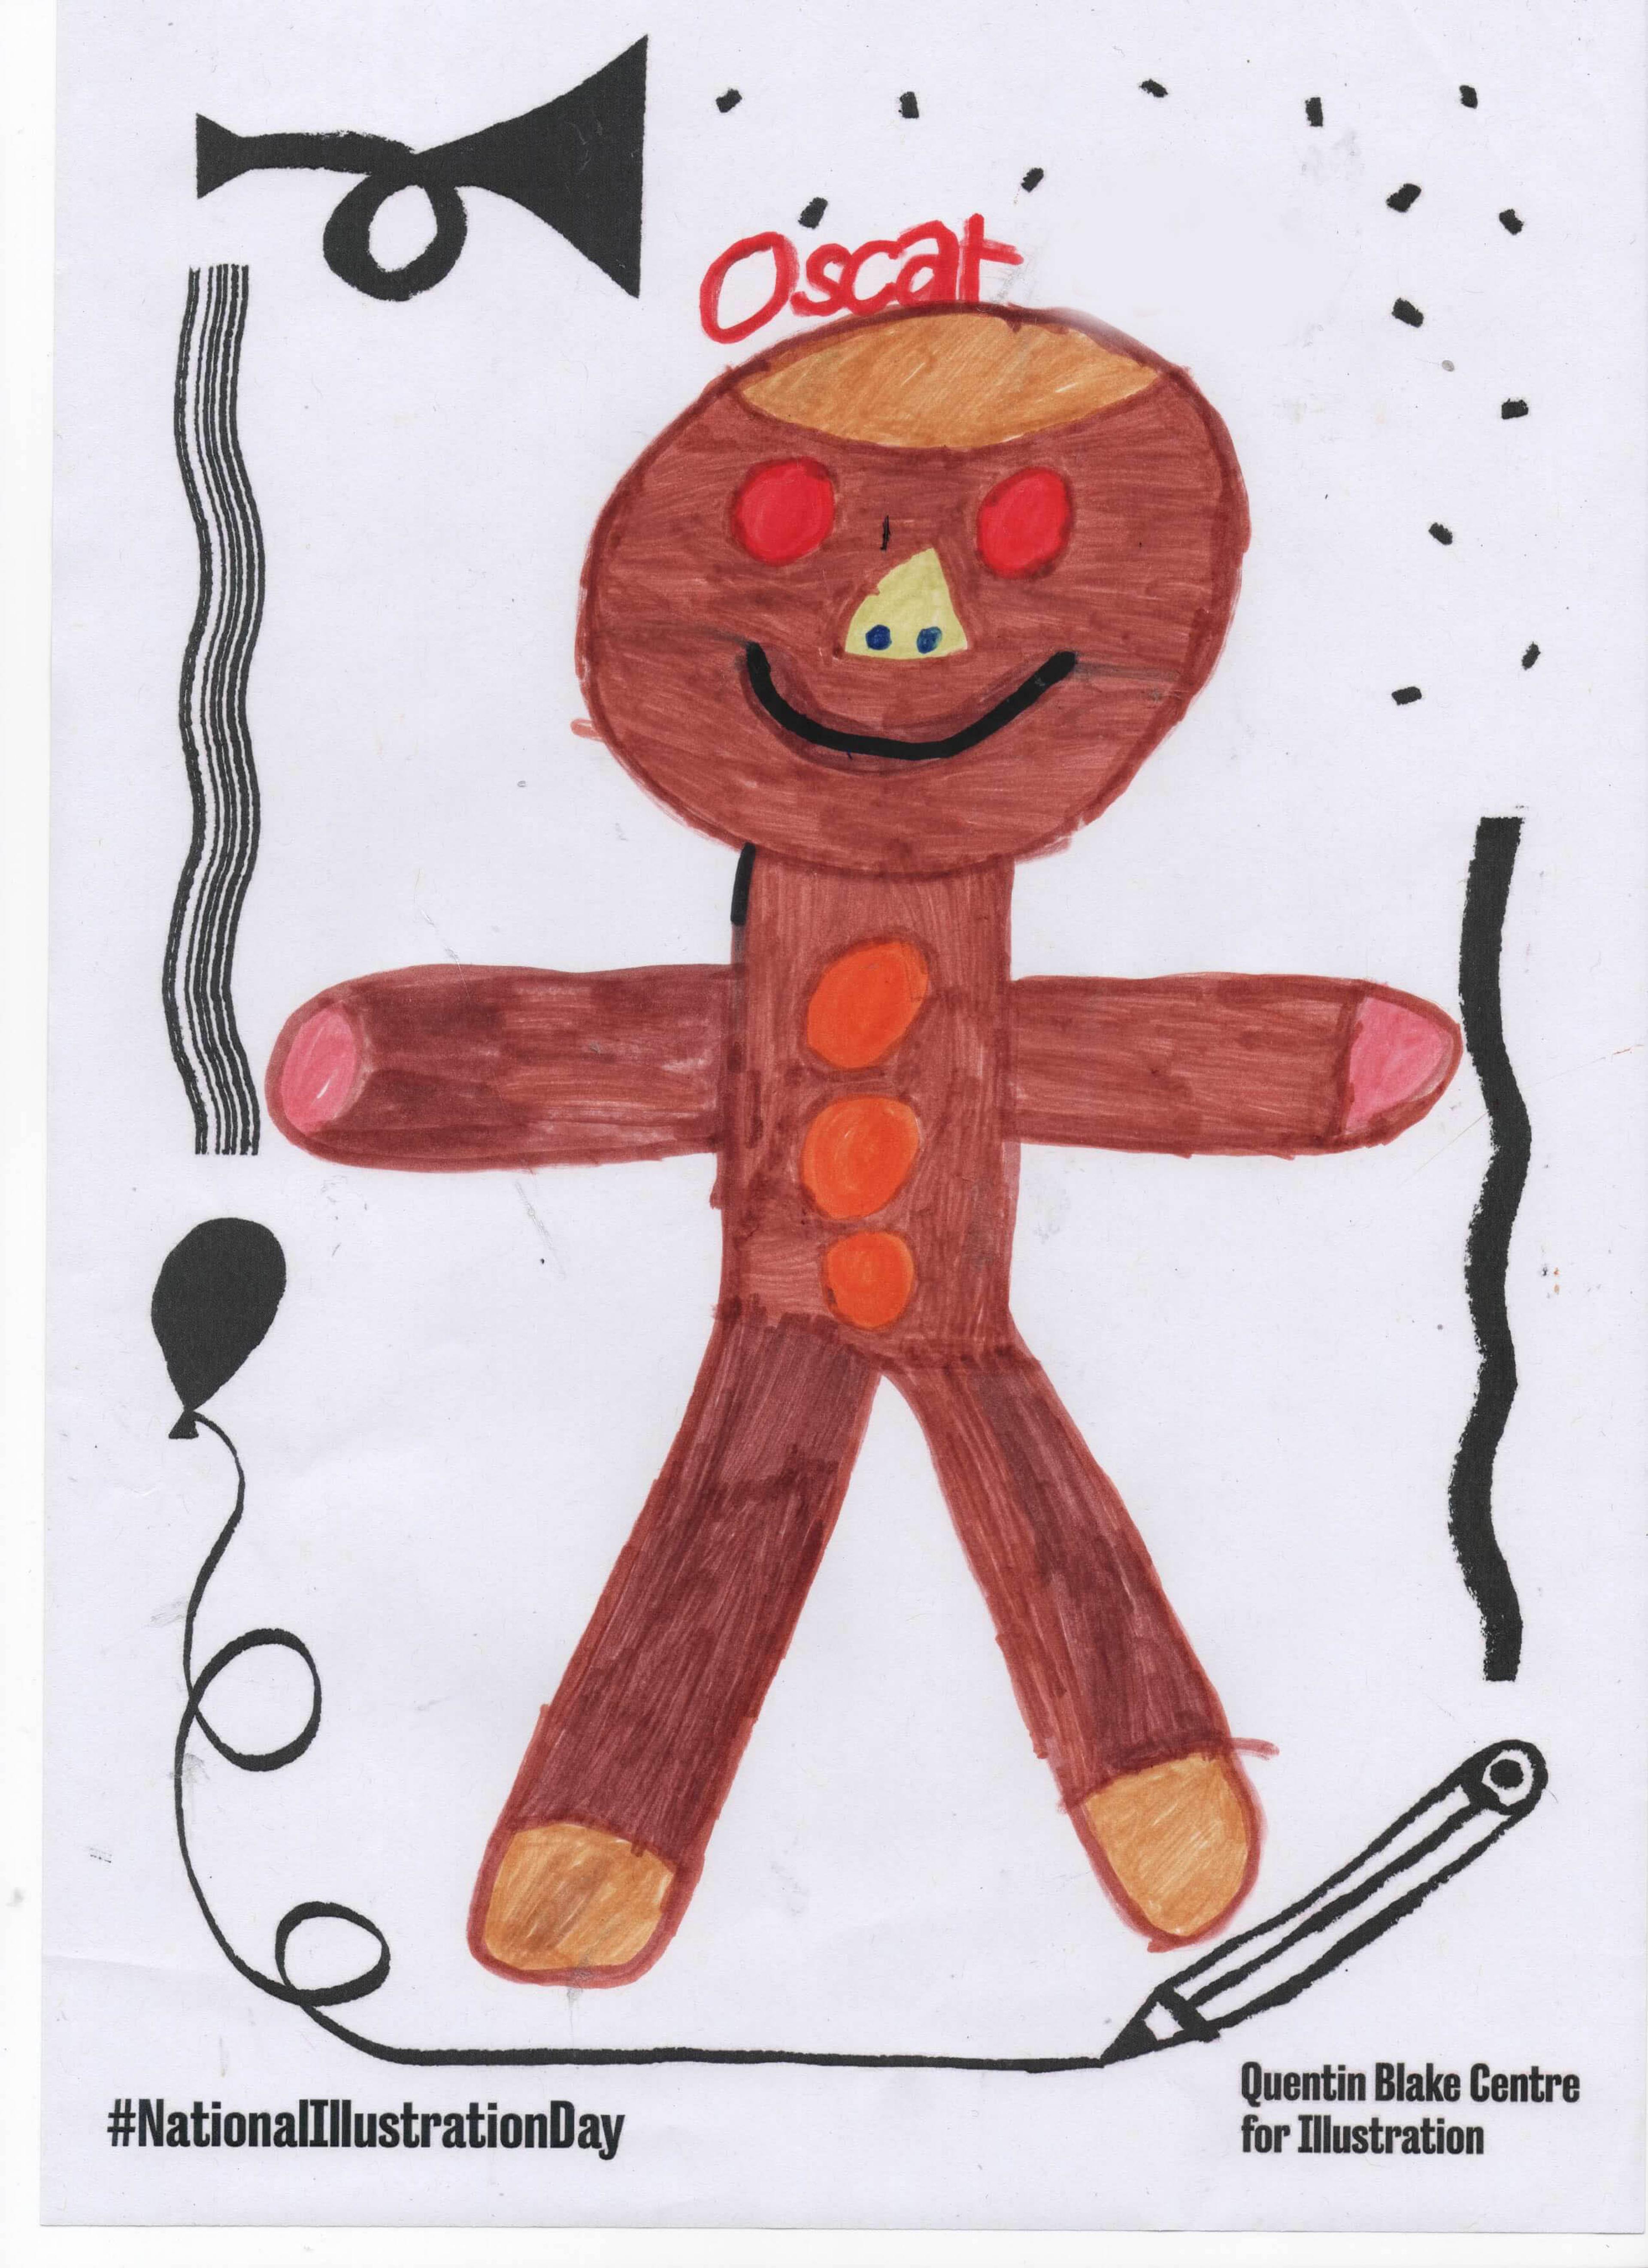 A full-coloured drawing of a smiling gingerbread man with big red eyes. 